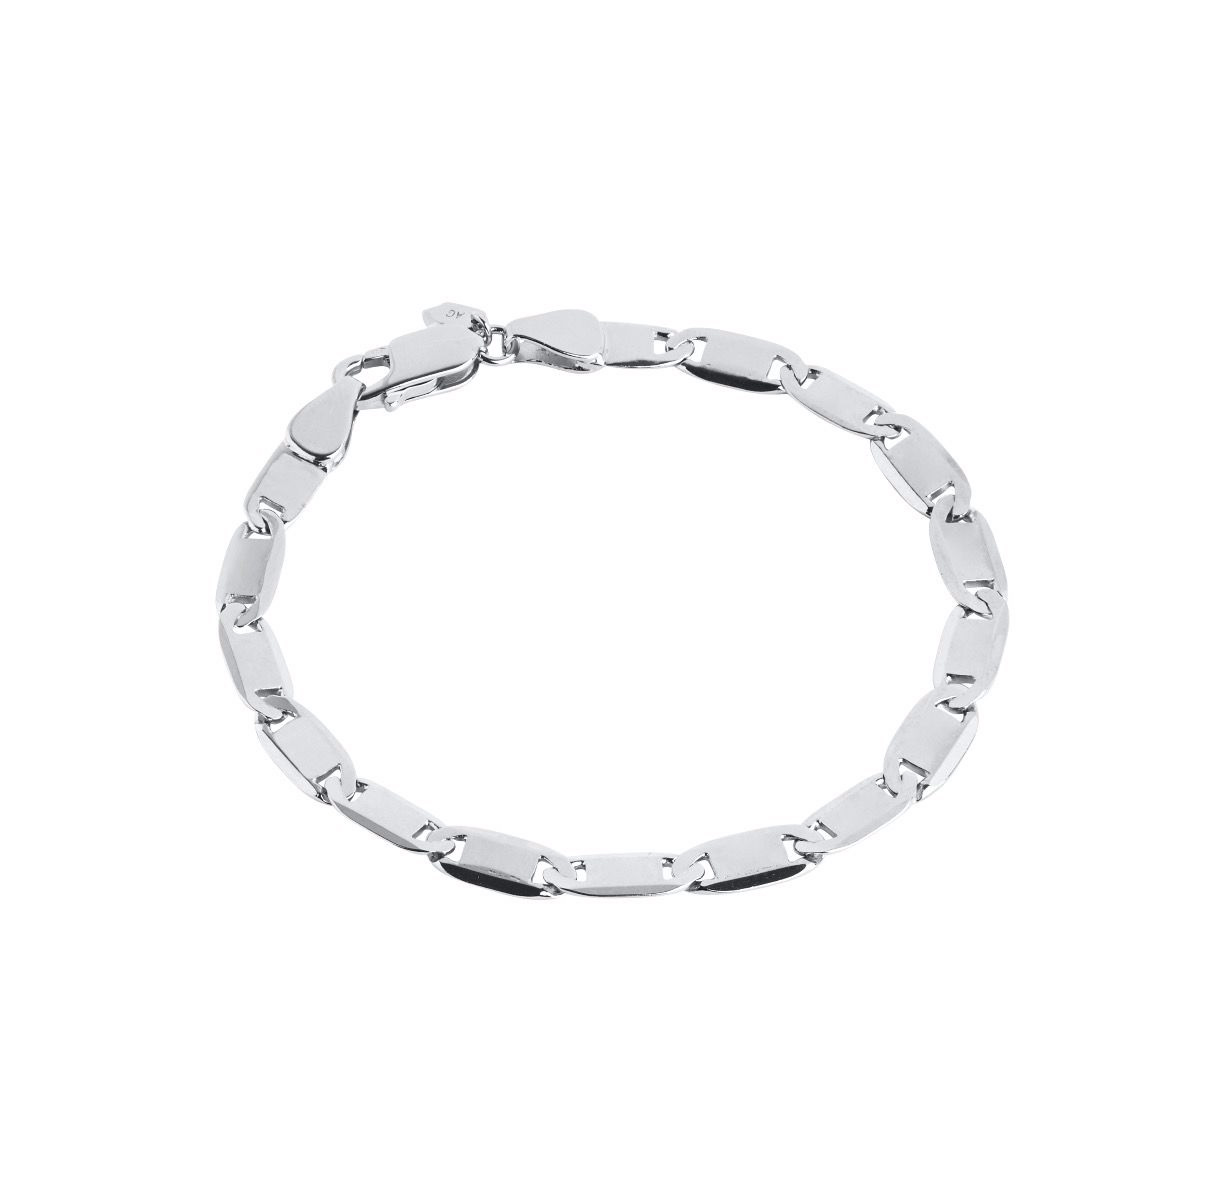 OEM/ODM Jewelry Custom wholesale sterling silver bracelet with white rhodium factory